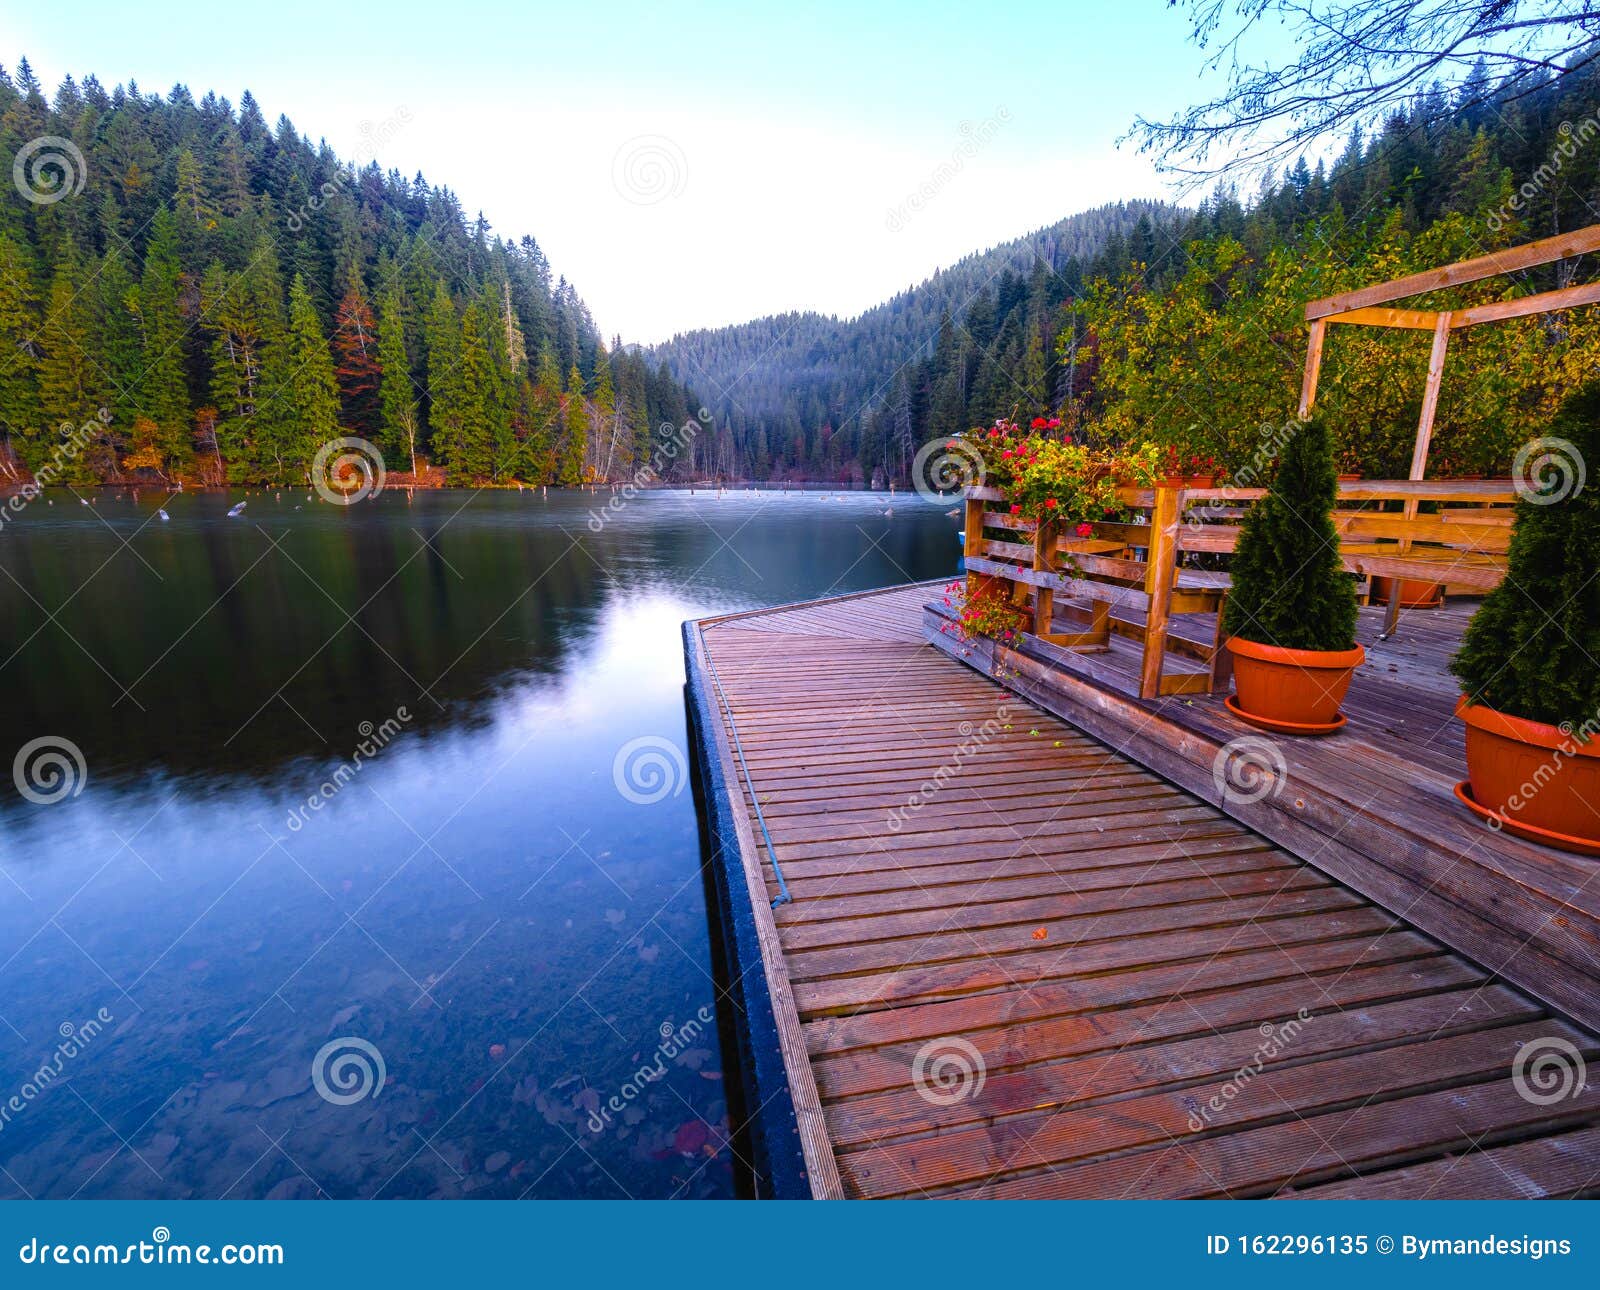 morning on the pontoon from on lacul rosu or red lake located in harghita county, romania, europe